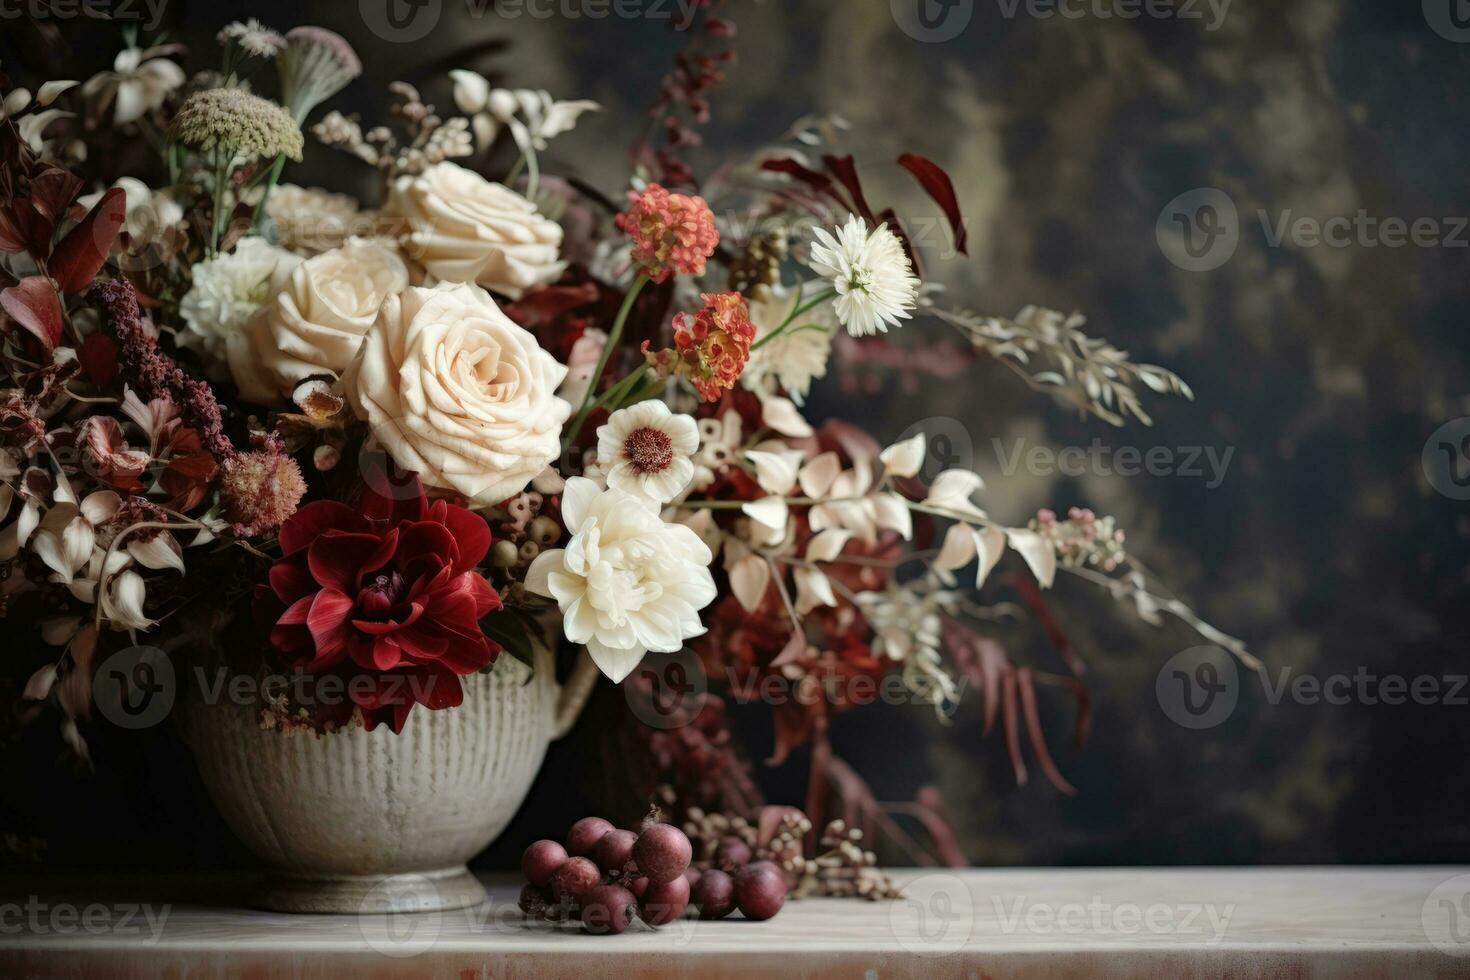 Organic Thanksgiving Floral Arrangements displayed in sophisticated tones of deep merlot red blush peach sage green and pearl white hues photo